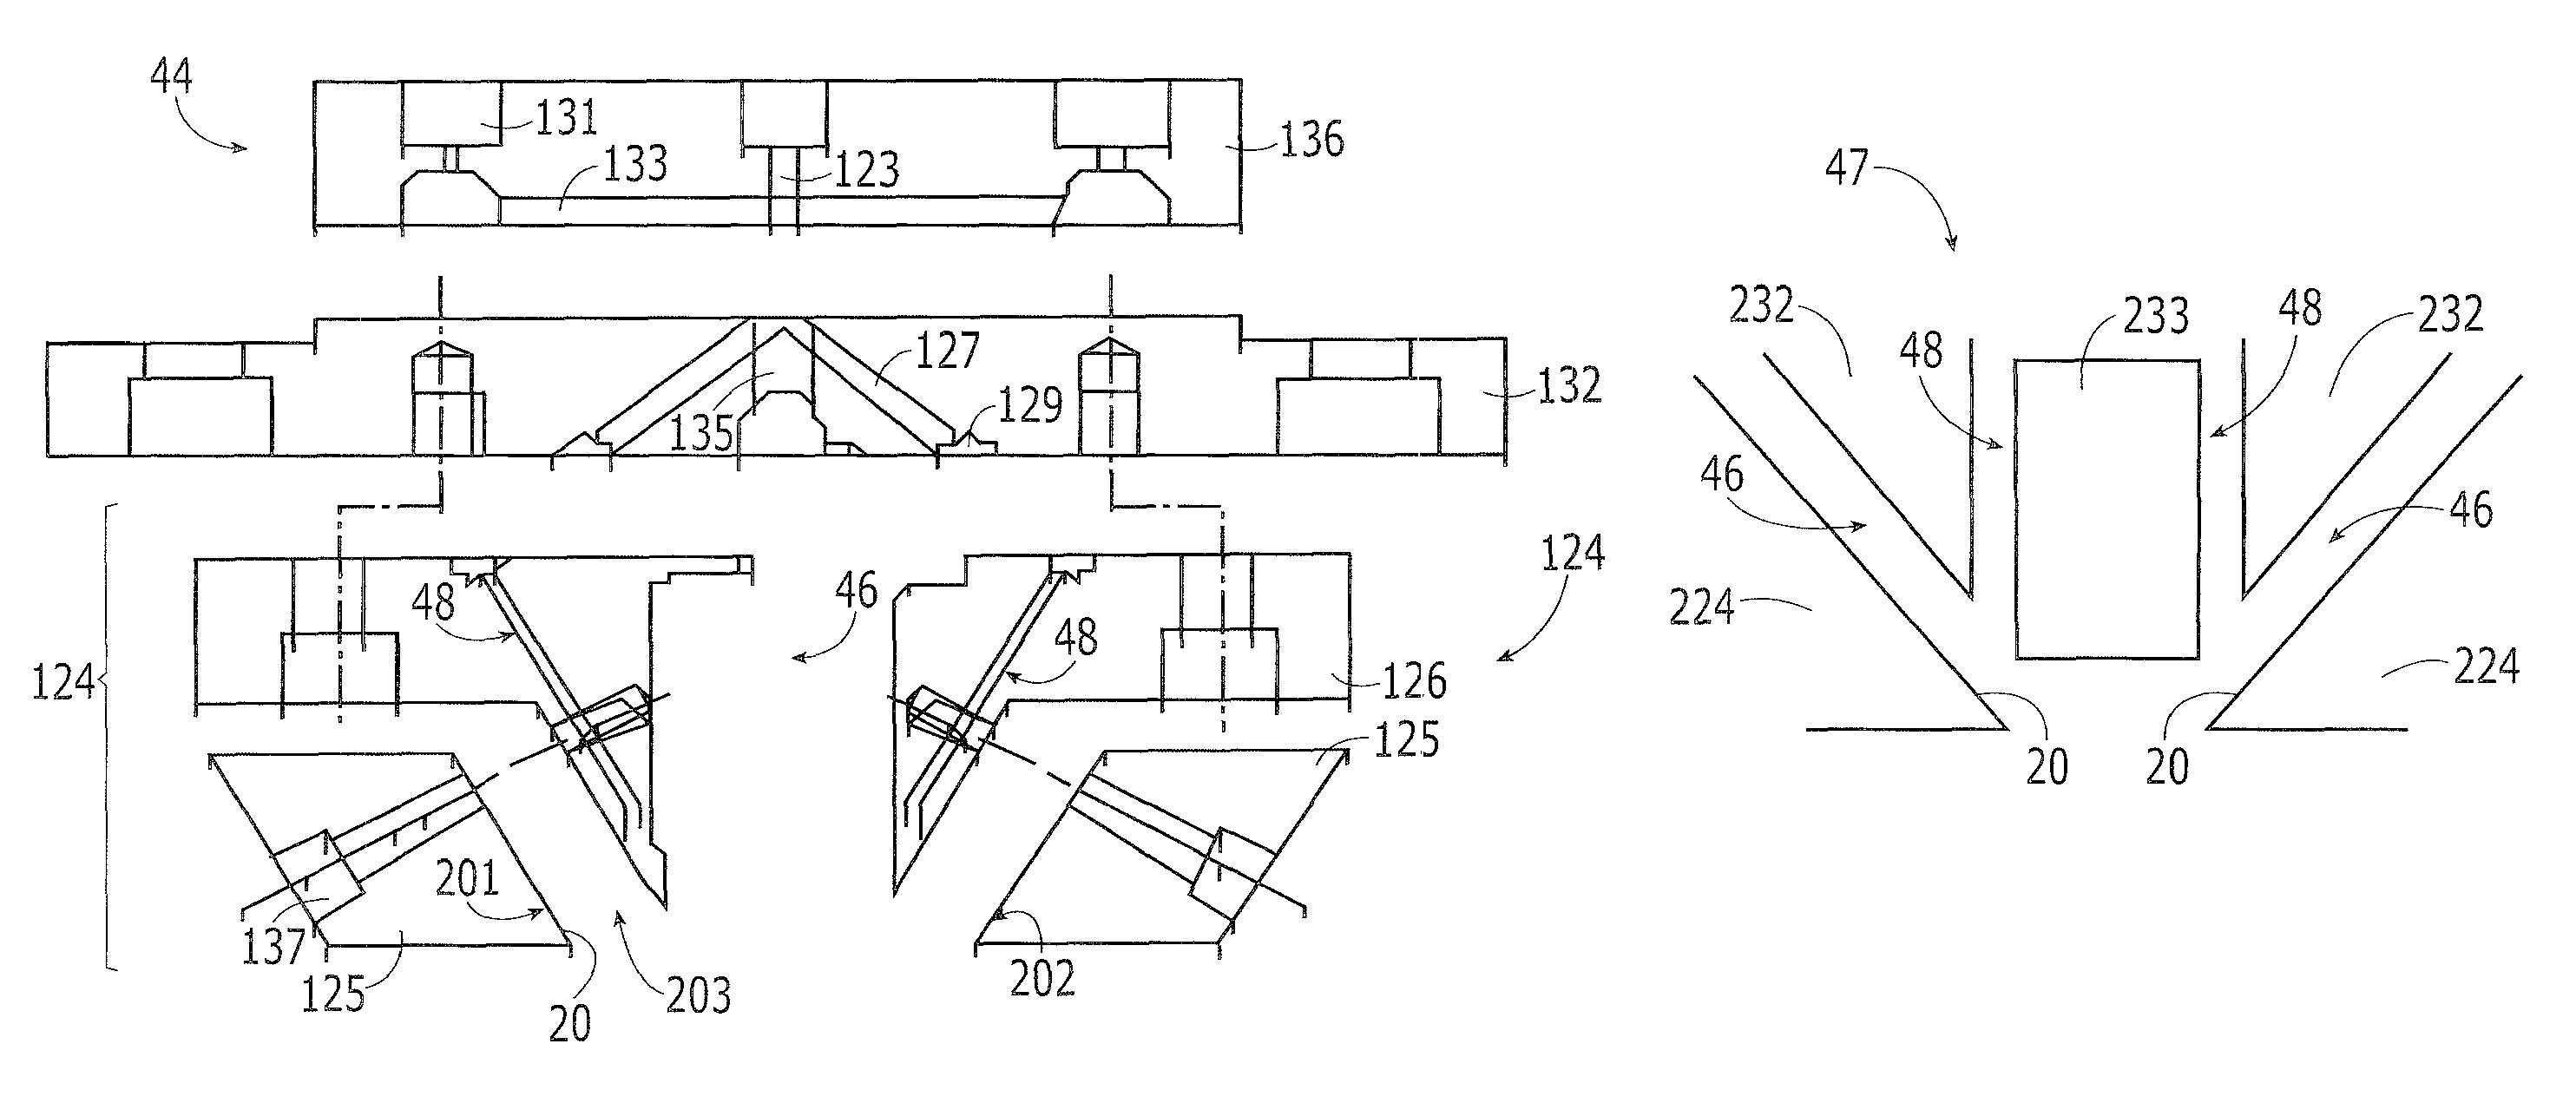 Apparatus and die cartridge assembly adapted for use therewith, and process for producing fibrous materials